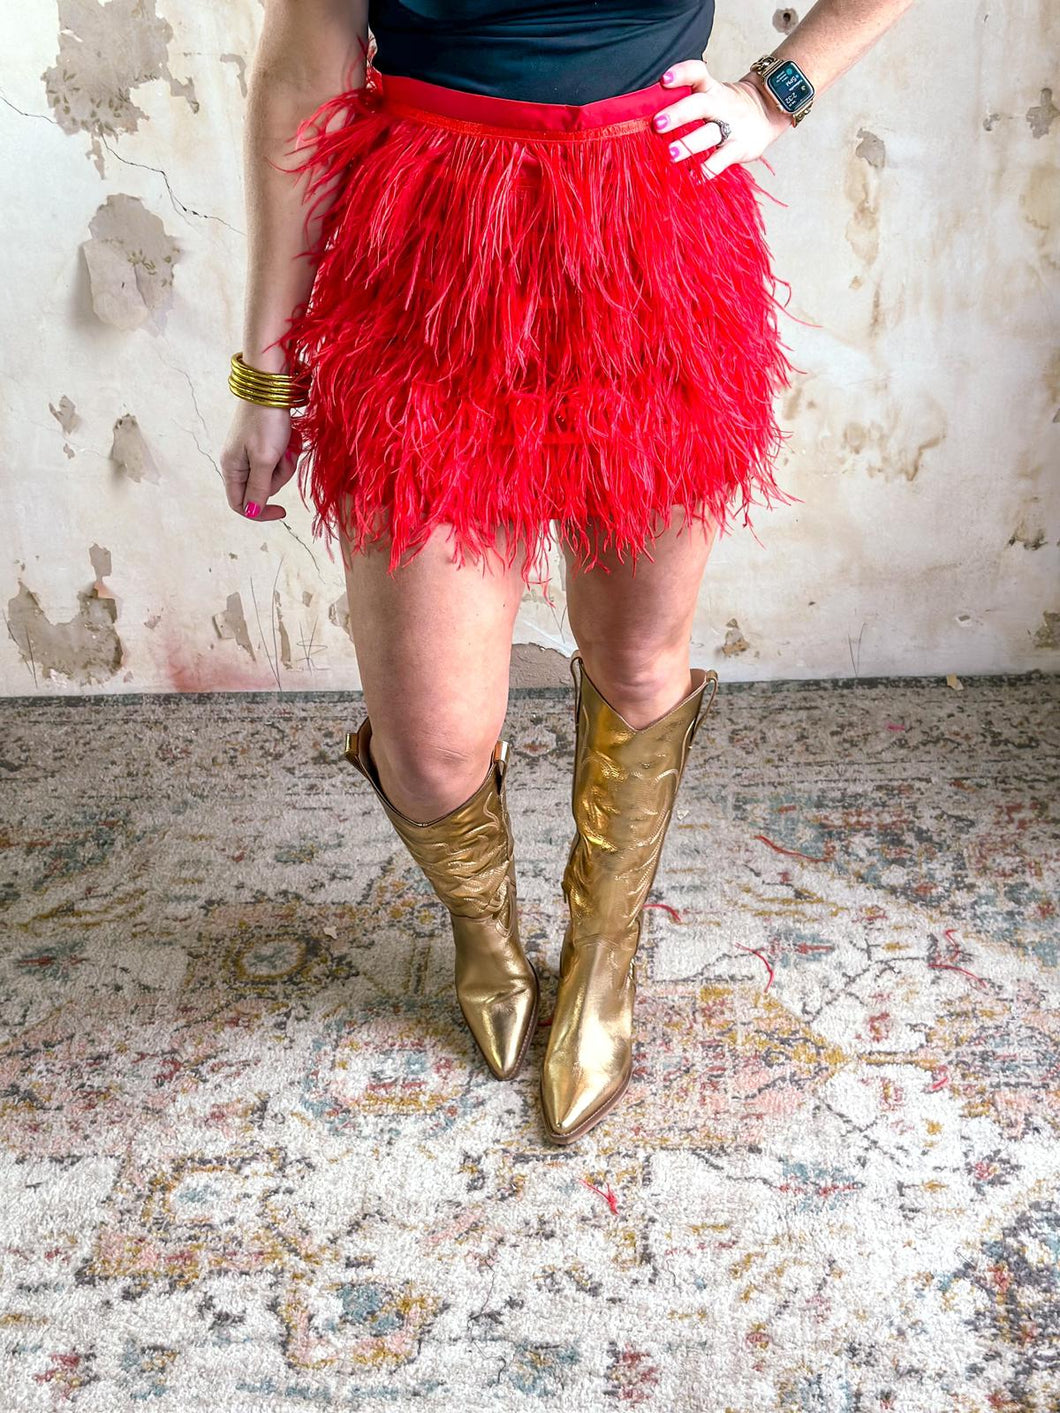 Queen of Sparkles: Bright Red Feather Skirt Extra Small